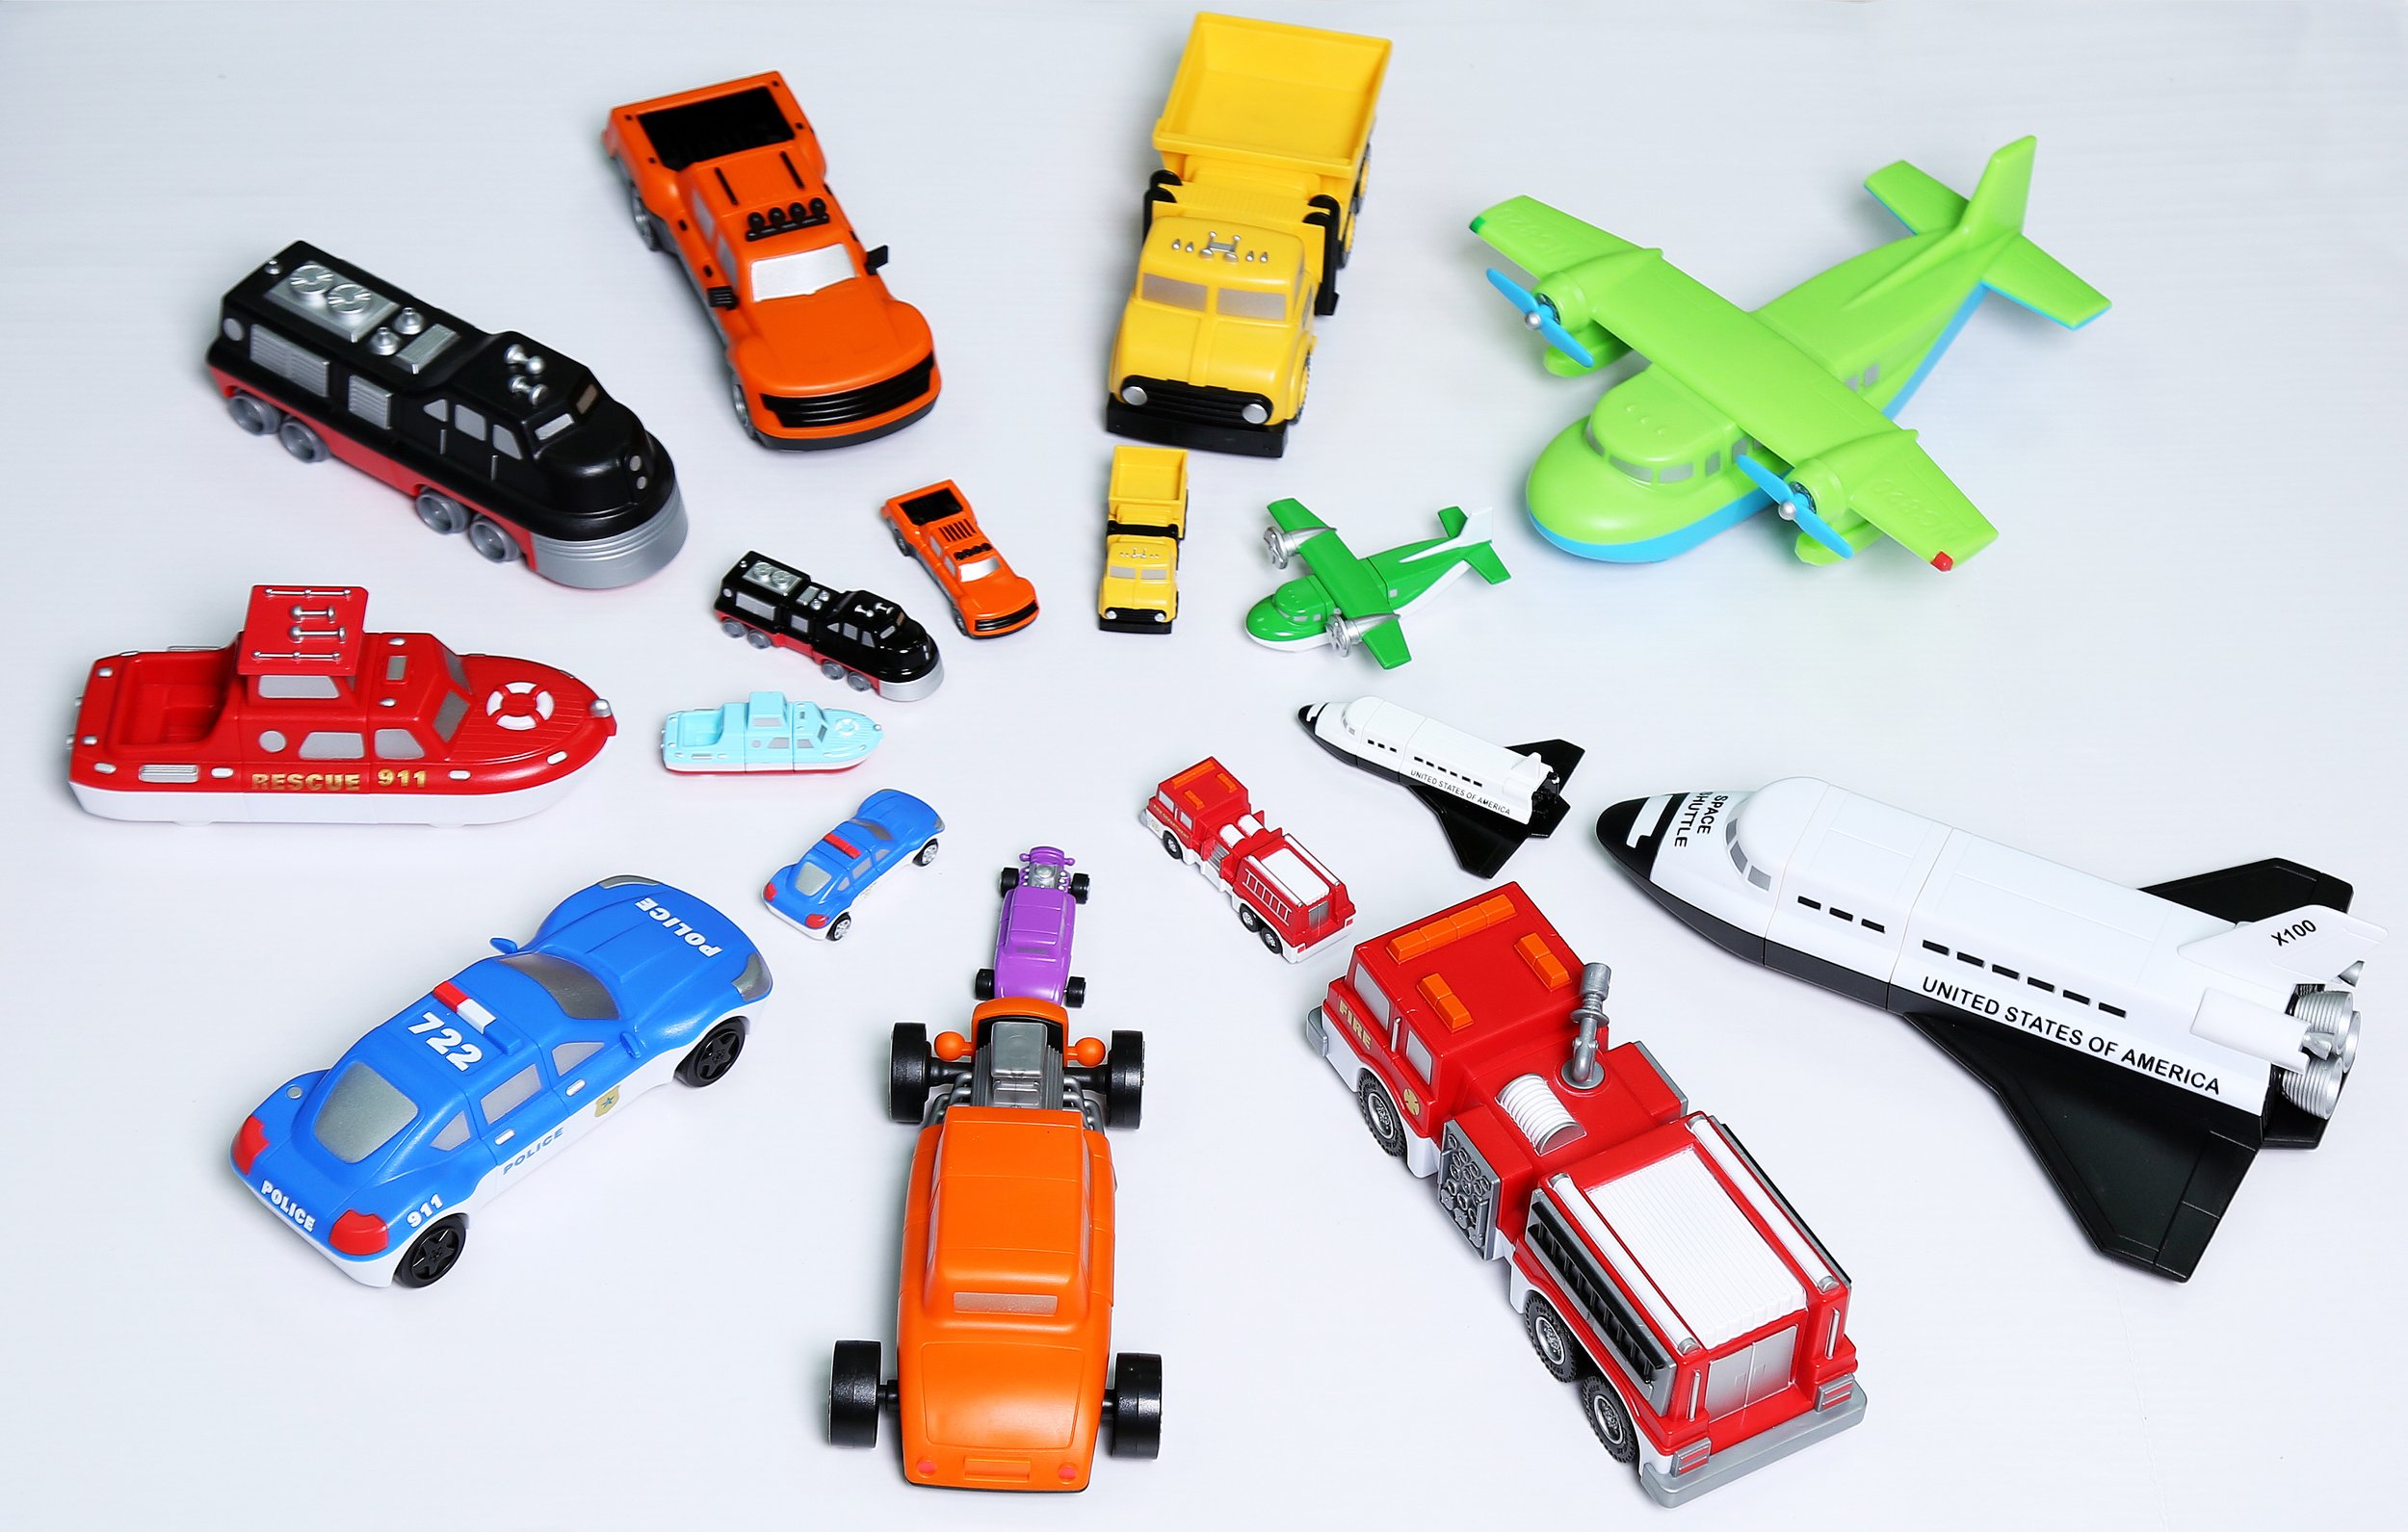  POPULAR PLAYTHINGS Mix or Match Vehicles, Magnetic Toy Play  Set, Race Cars : Toys & Games